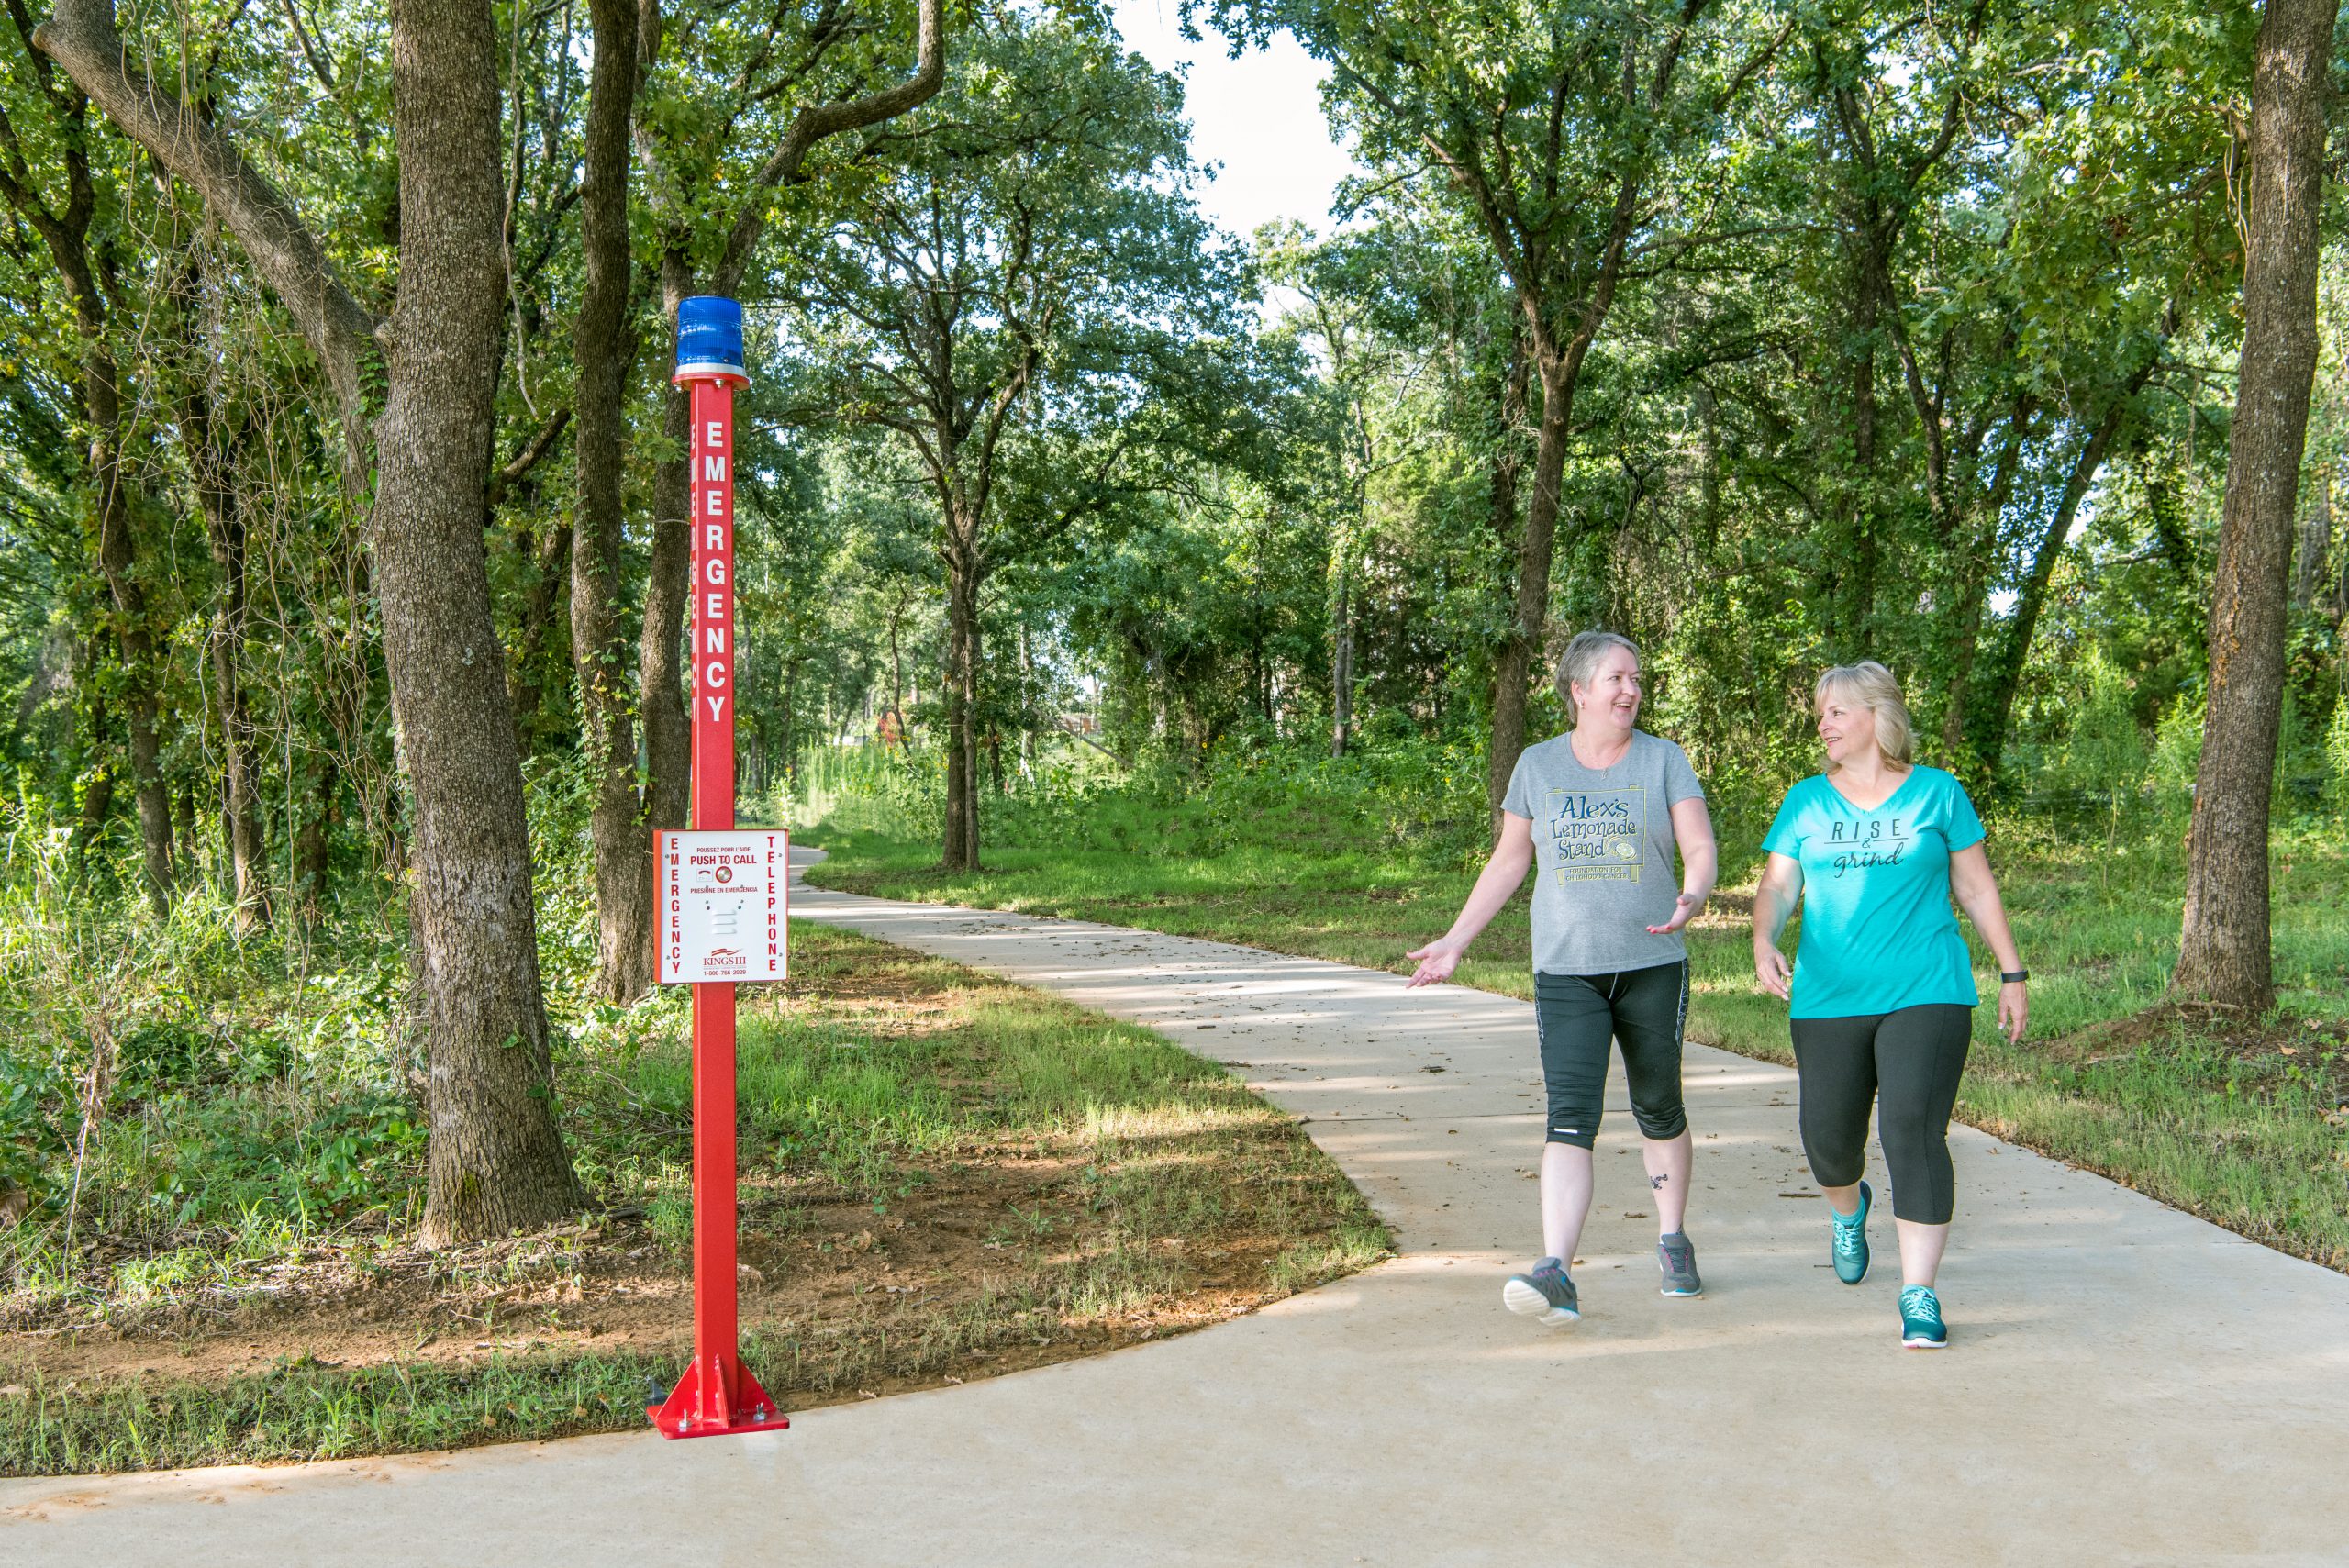 Two women walking on a path in the woods, surrounded by tall trees and lush greenery passing by a tall red emergency help phone